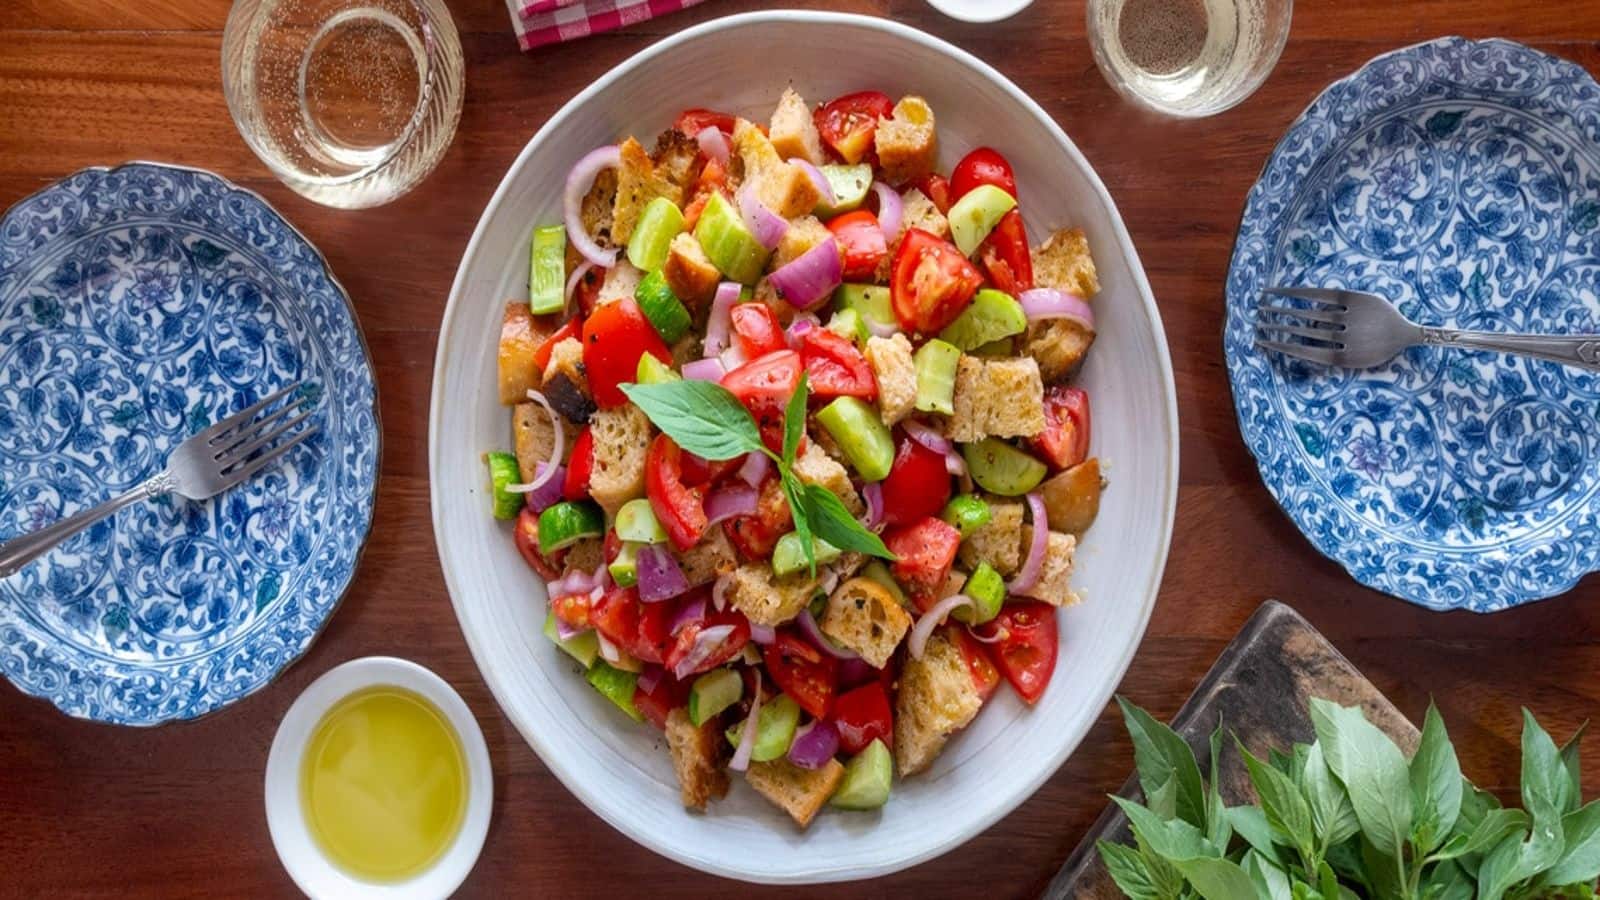 Impress your guests with this vegetarian Tuscan panzanella recipe